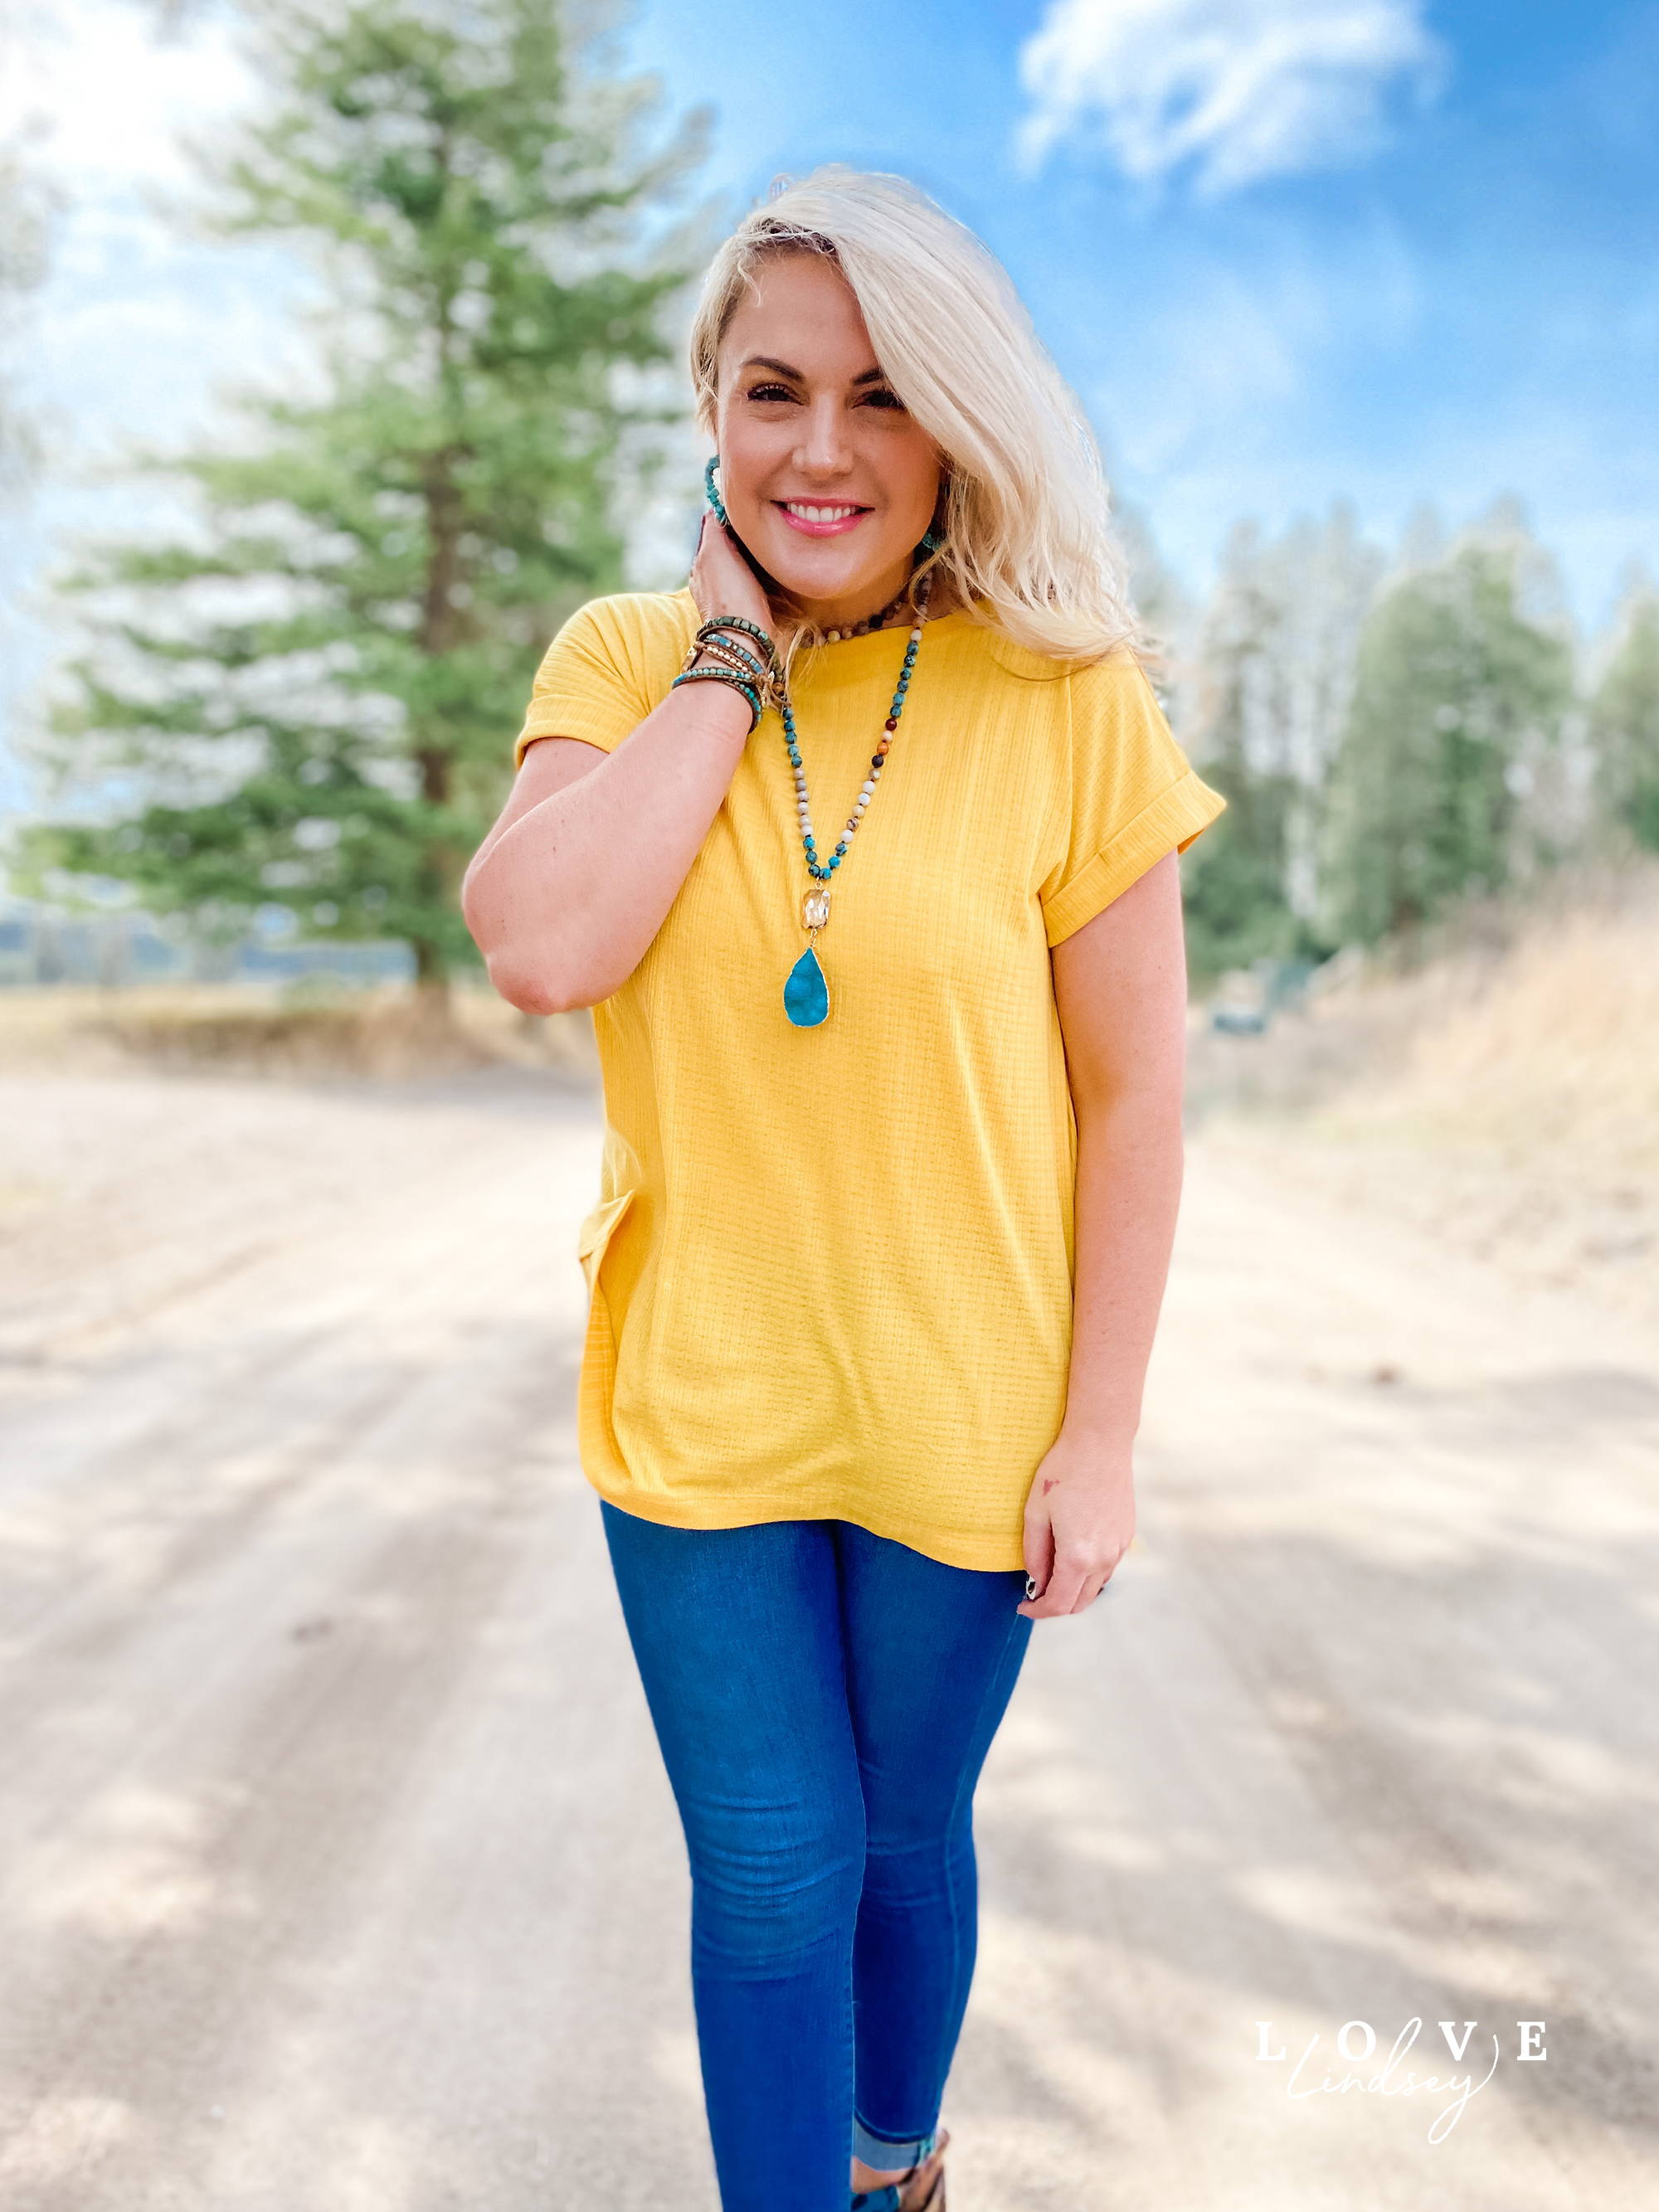 How To Wear Turquoise Jewelry: My Top Styling Tips! – LoveLindsey